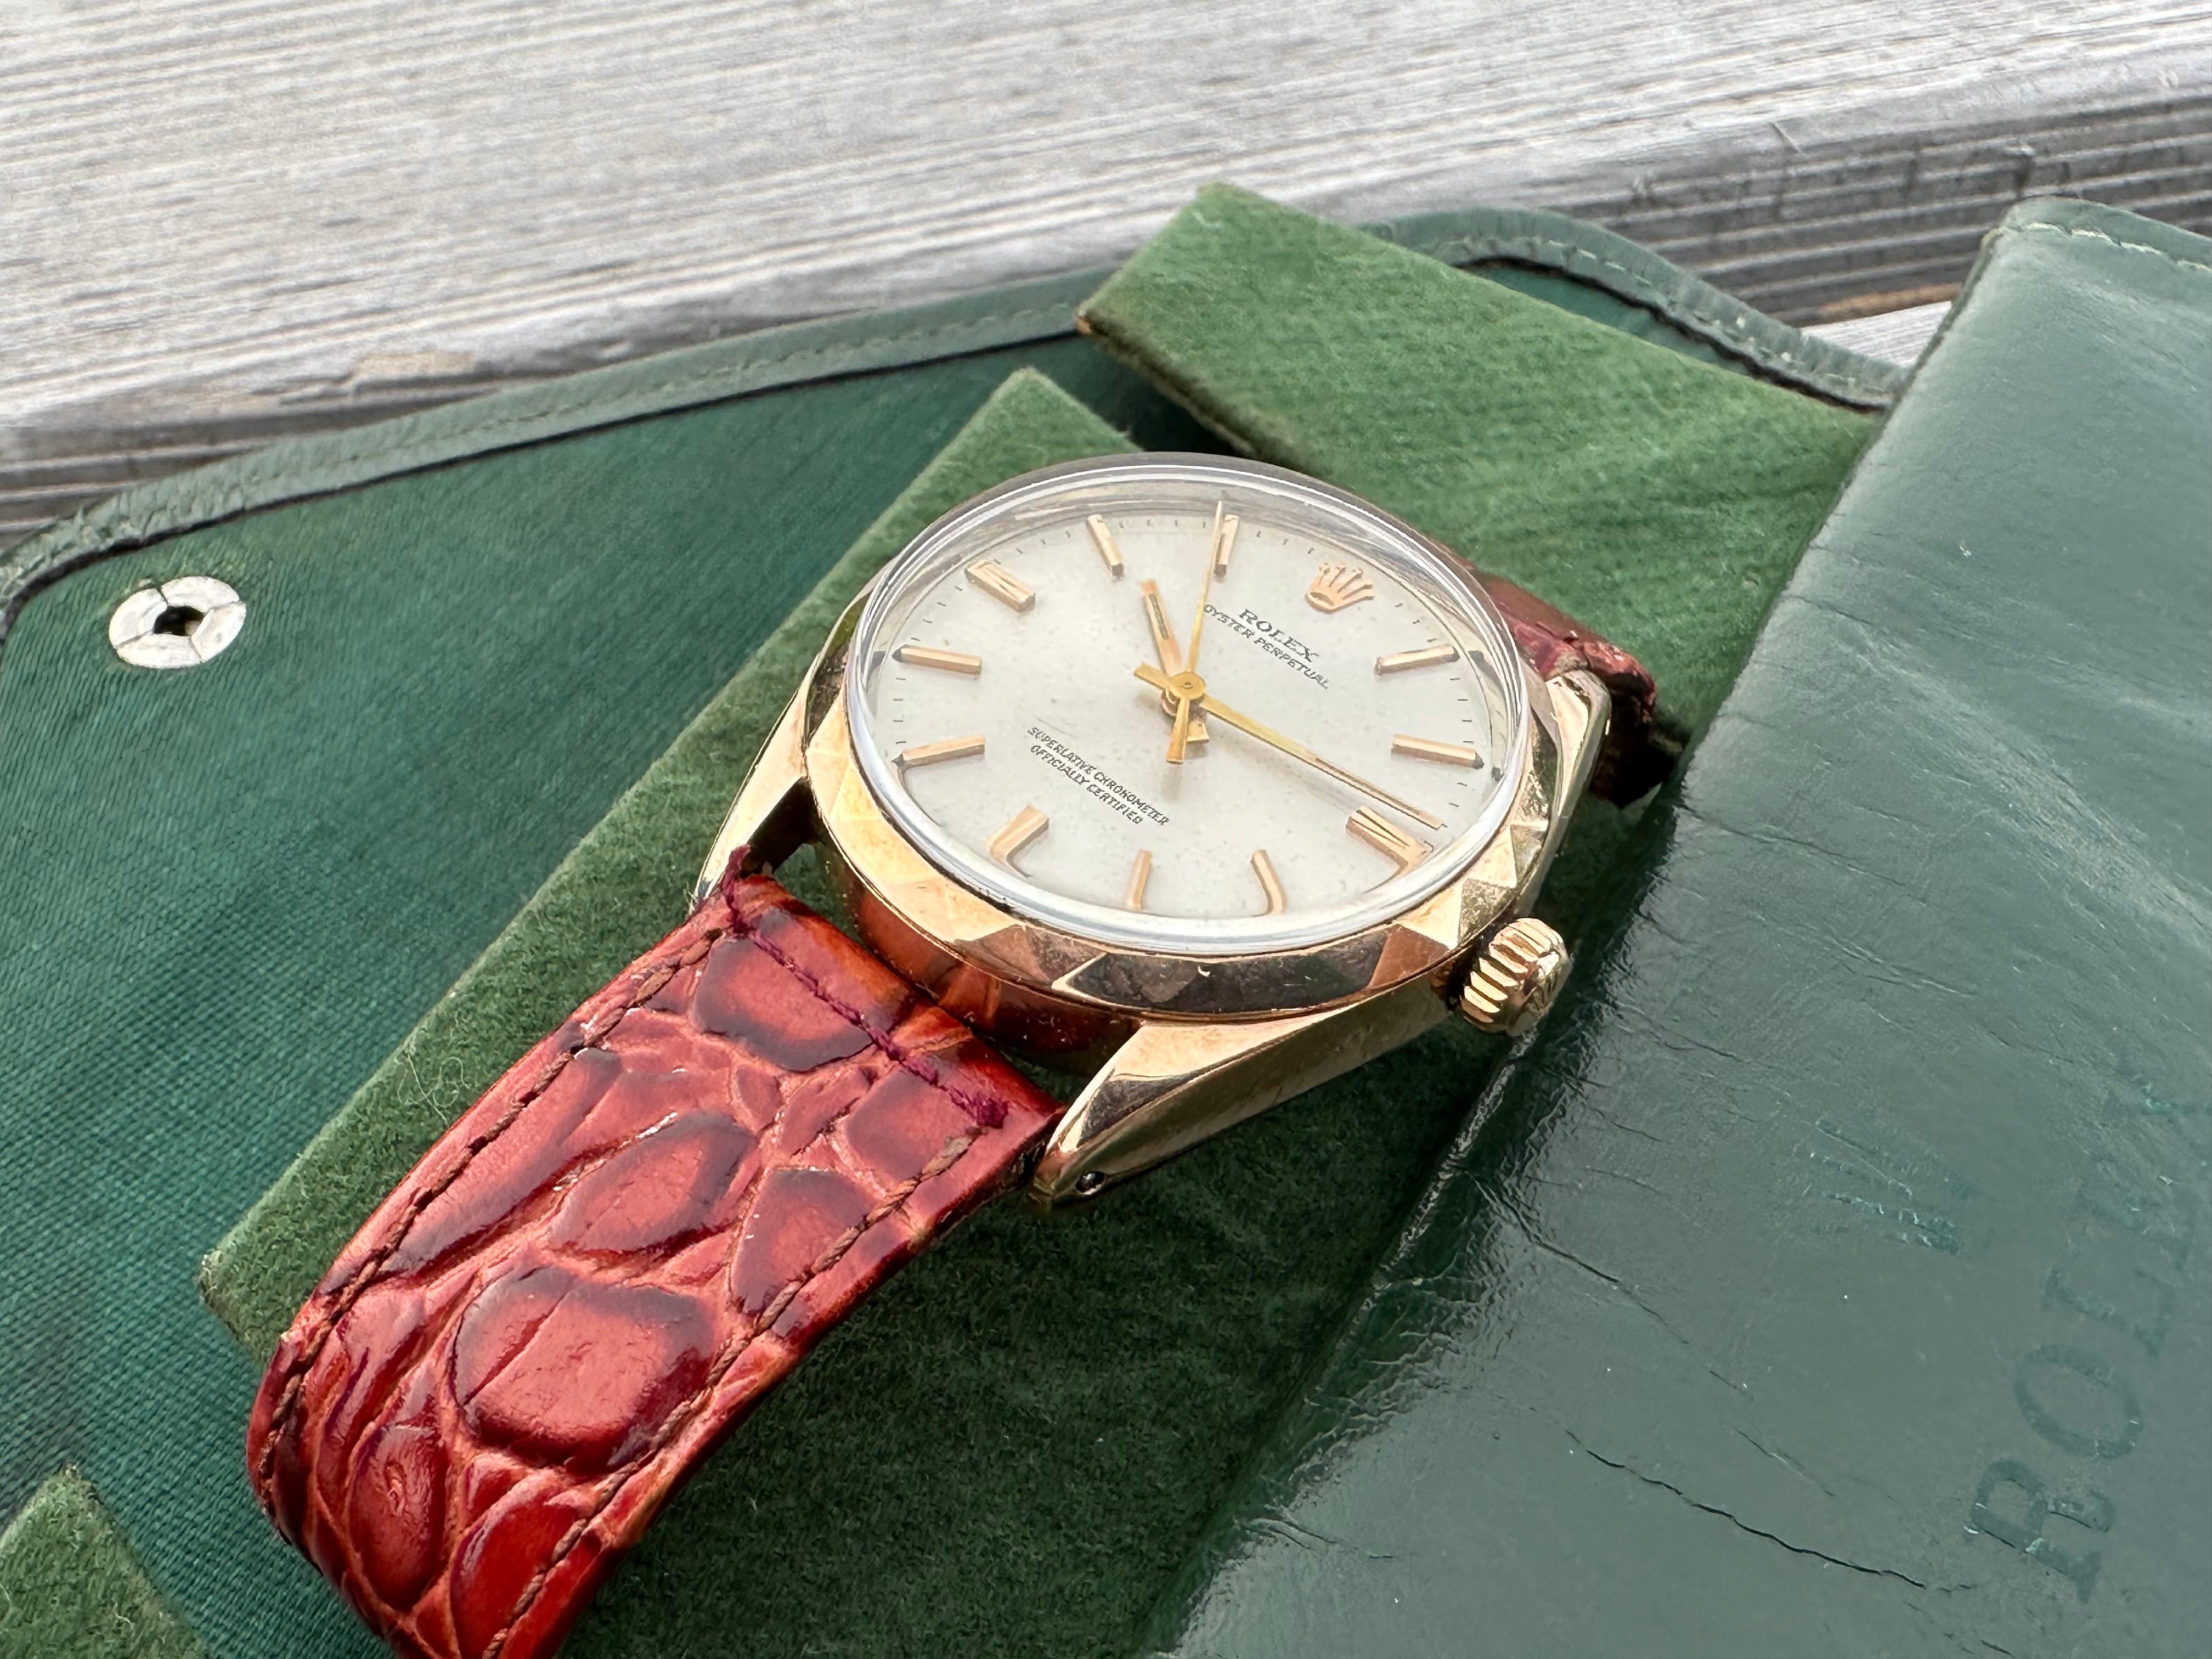 Brand : Rolex

Model: Oyster Perpetual

Reference Number : 1025

Features : Screw down Crown - Date Indicator - Rare Triangle Bezel

Country Of Manufacture: Switzerland

Movement: Automatic

Case Material: Stainless Steel

Measurements : 34mm